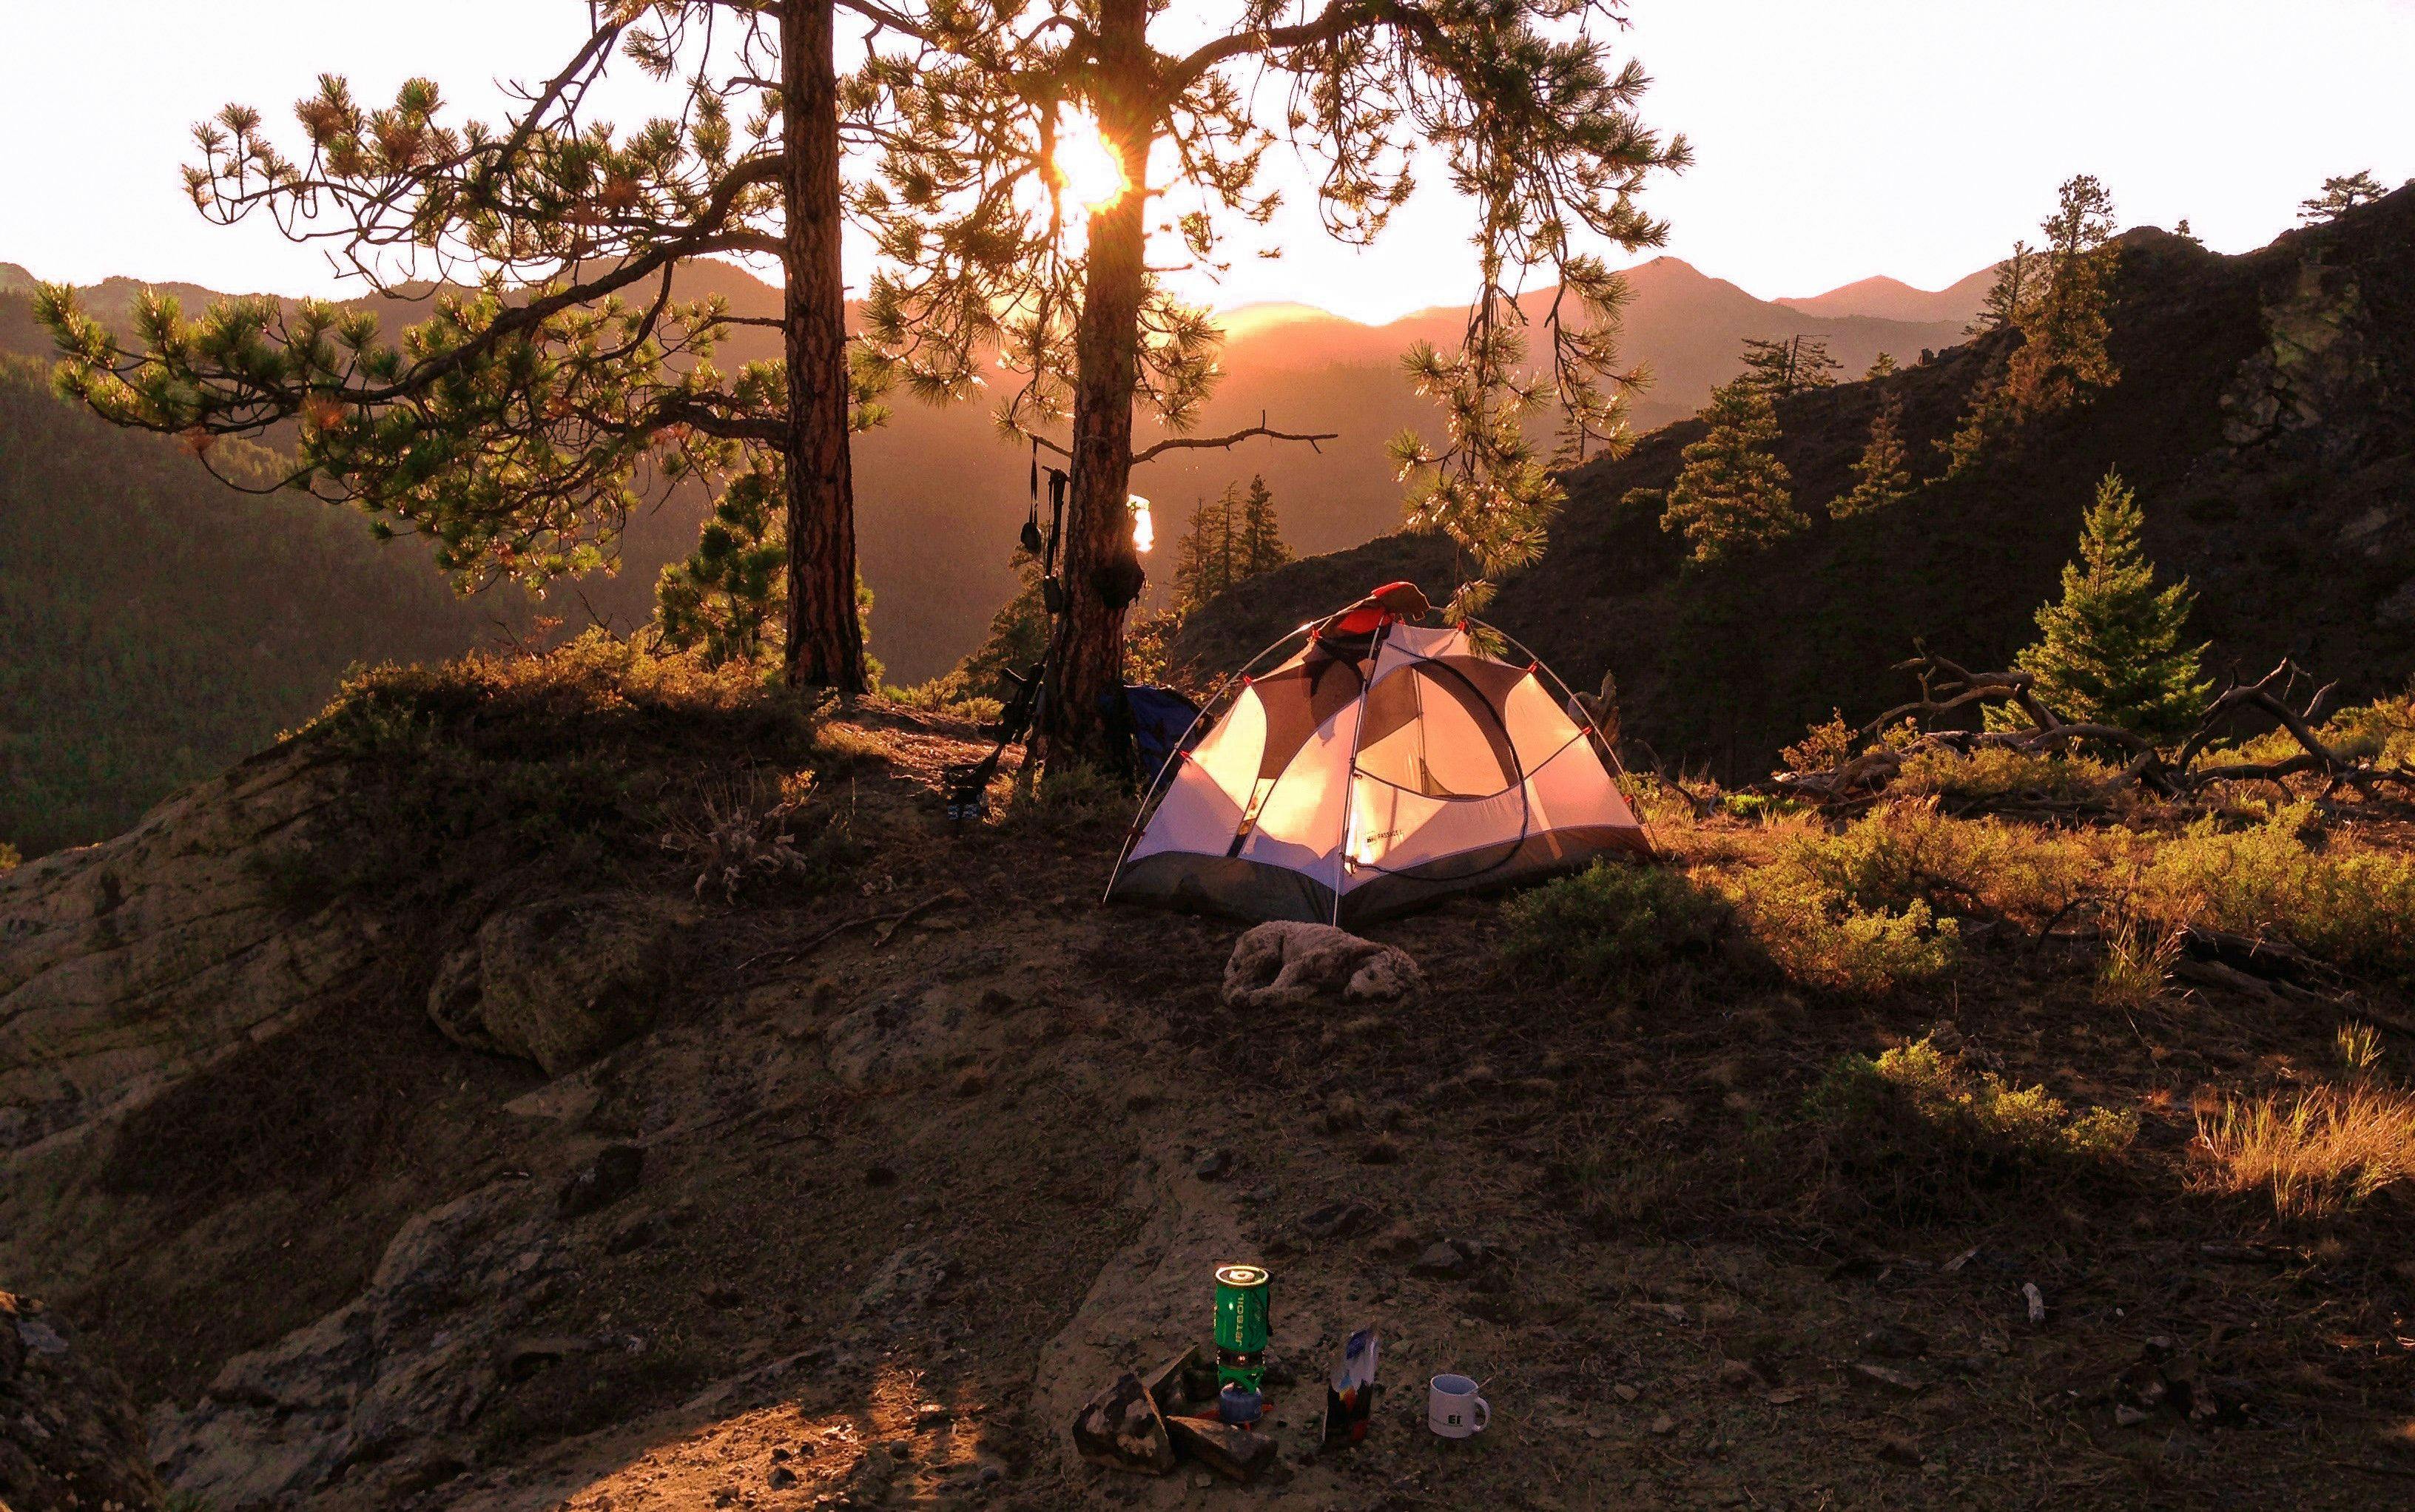 Picture of a rented camping tent in the forrest in sunset